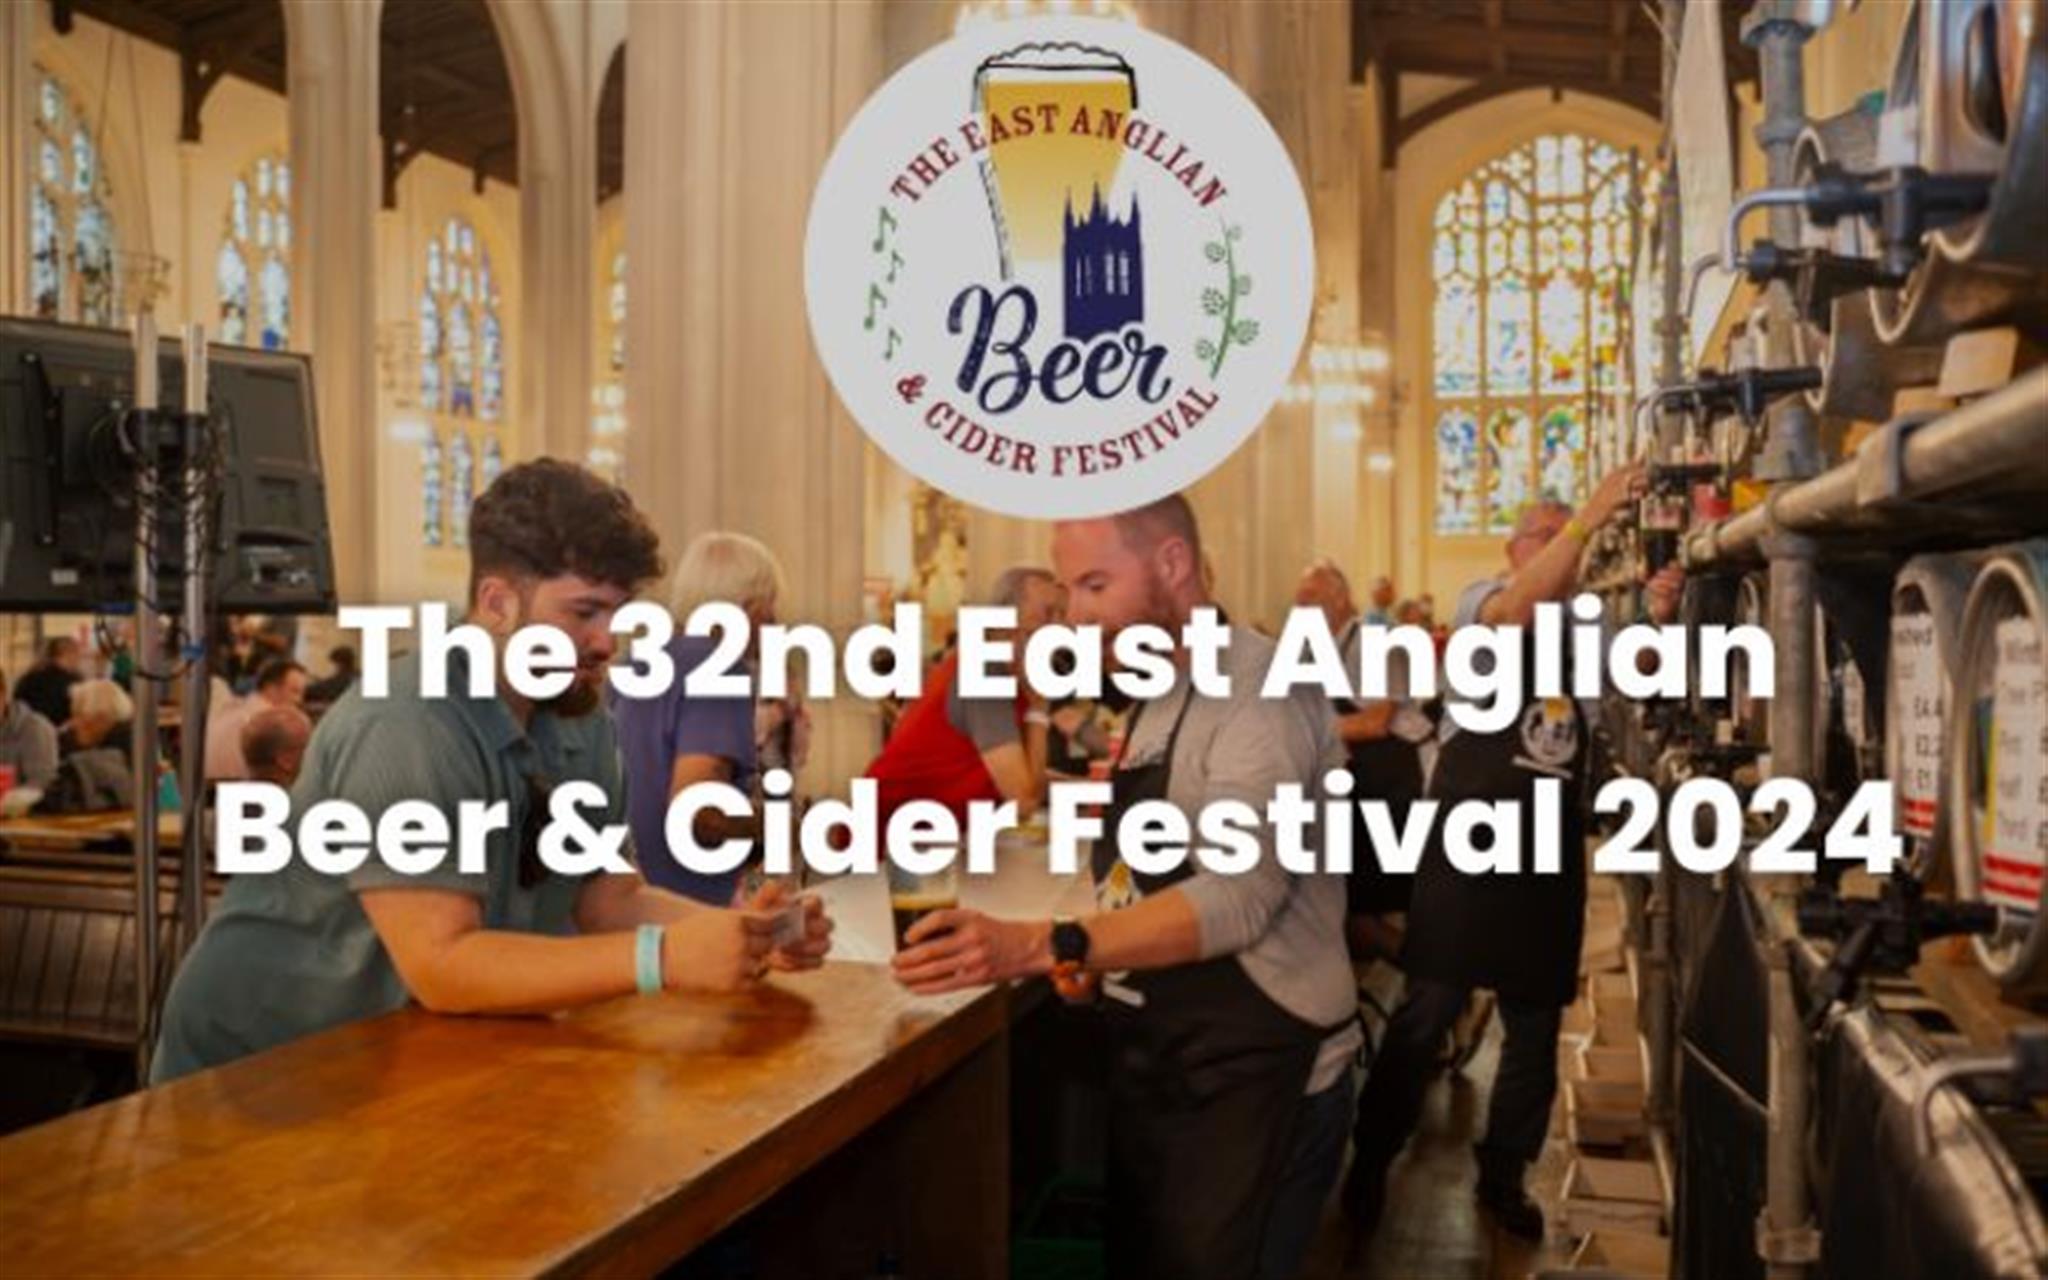 The 32nd East Anglian Beer & Cider Festival 2024